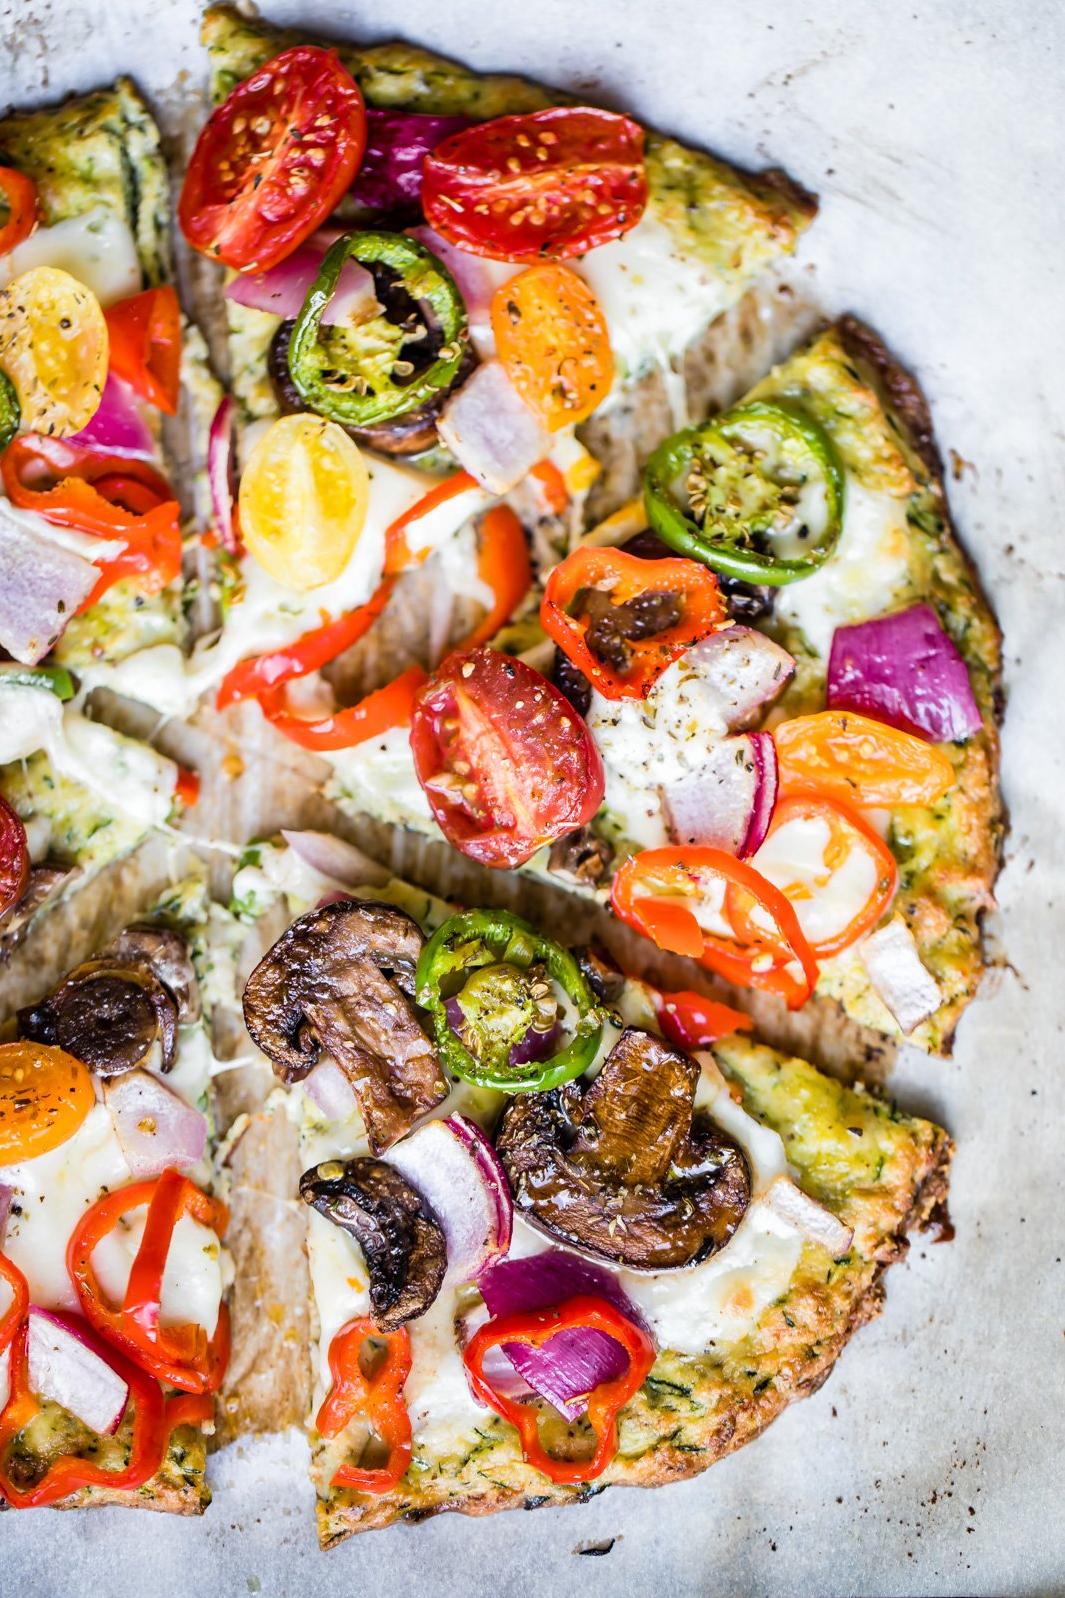  You won't miss the gluten with this amazing zucchini crust pizza recipe.